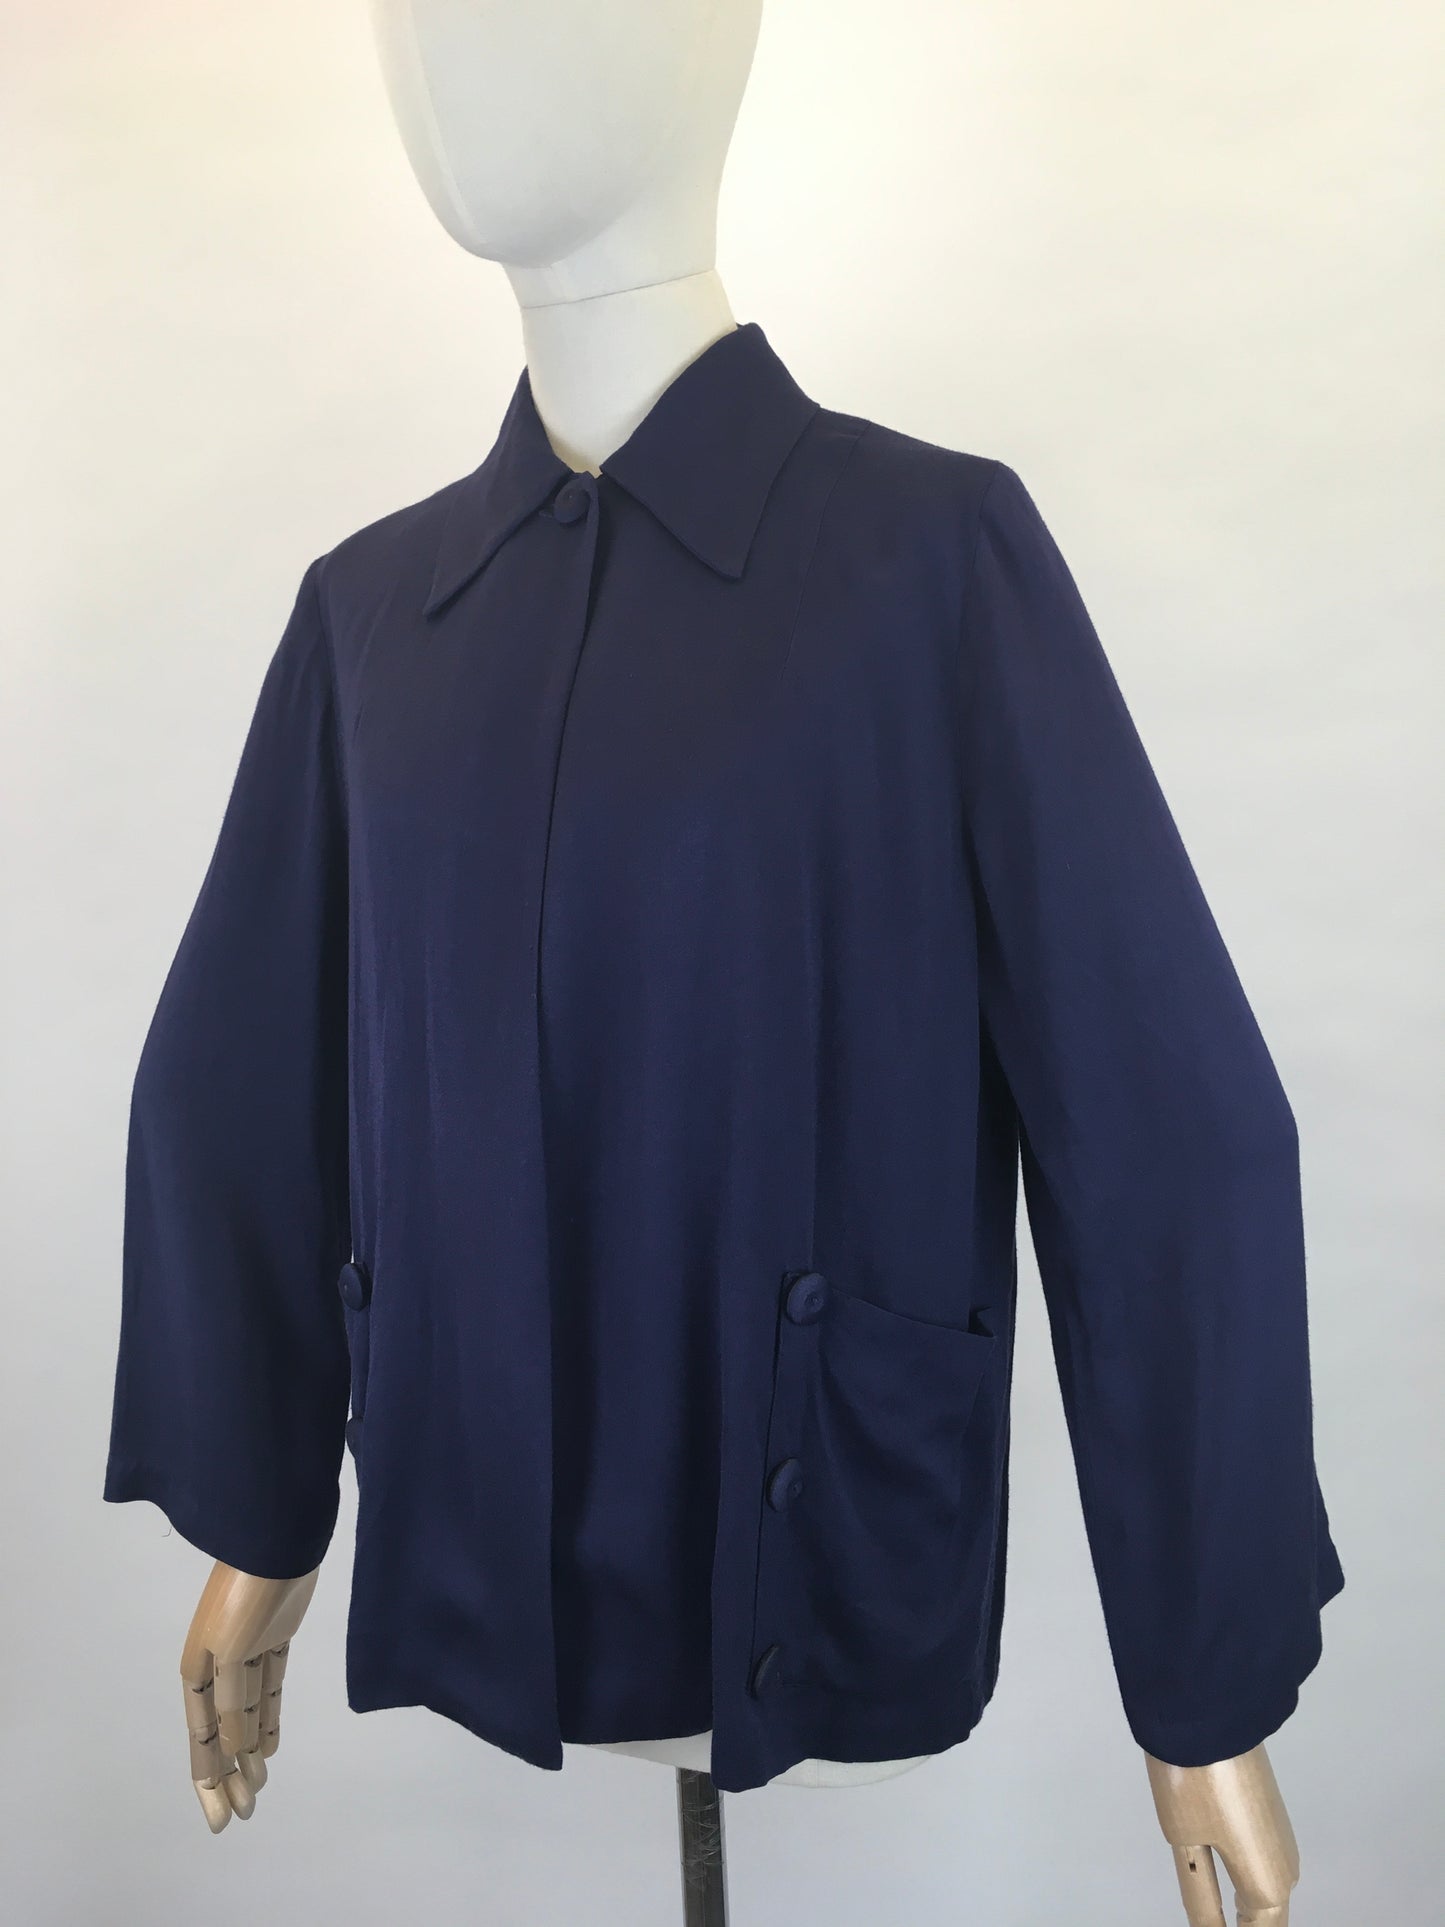 Original 1940s Stunning Navy Swagger Jacket - In a Lightweight Gab Fabric with lovely Button Detailing